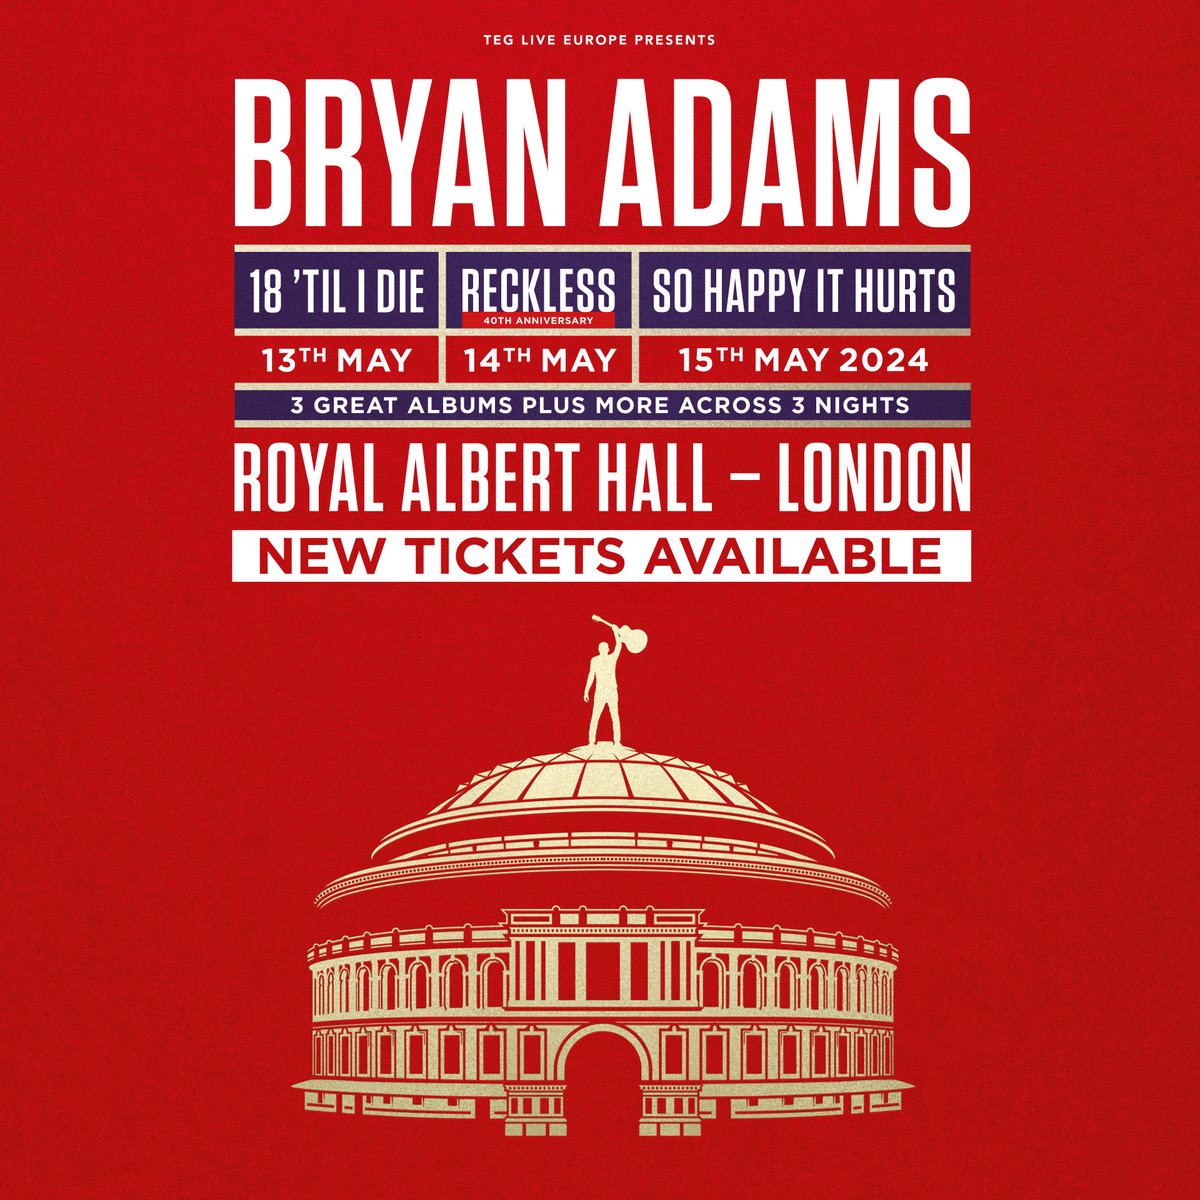 📢 @bryanadams fans, we've got some good news for you. Tickets have been released for all dates of his three-night residency next week. Book now: bit.ly/4b5RSpX